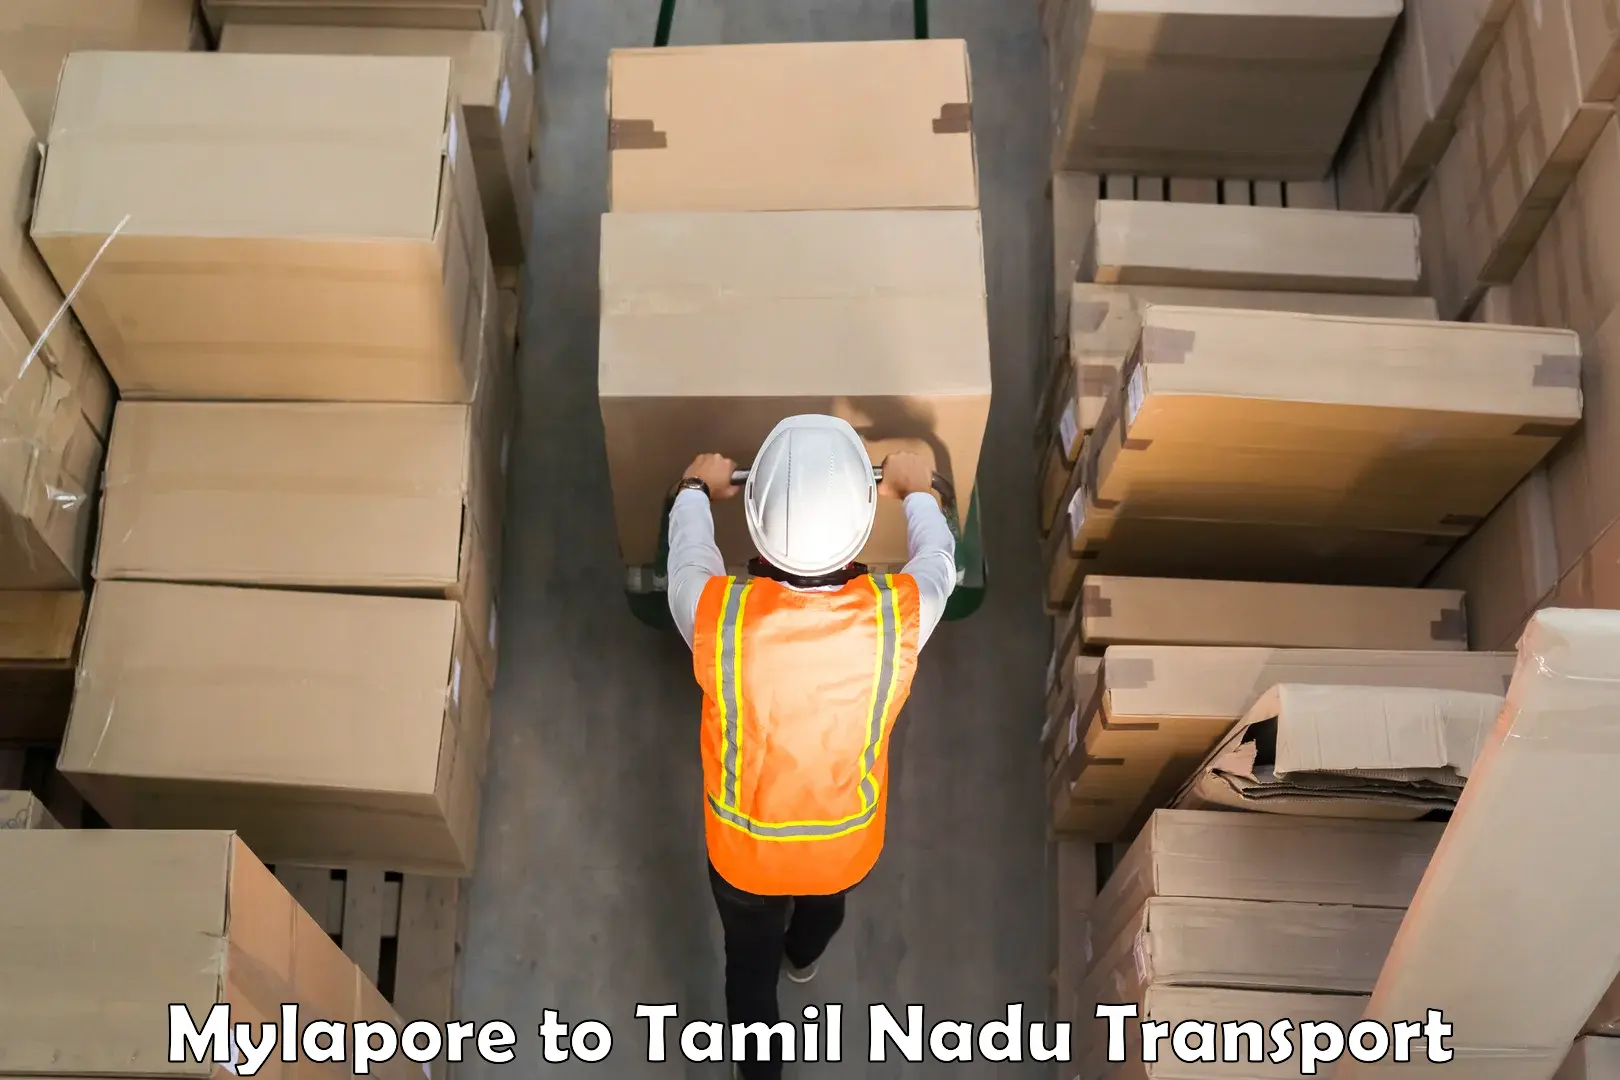 Daily parcel service transport Mylapore to Mettur